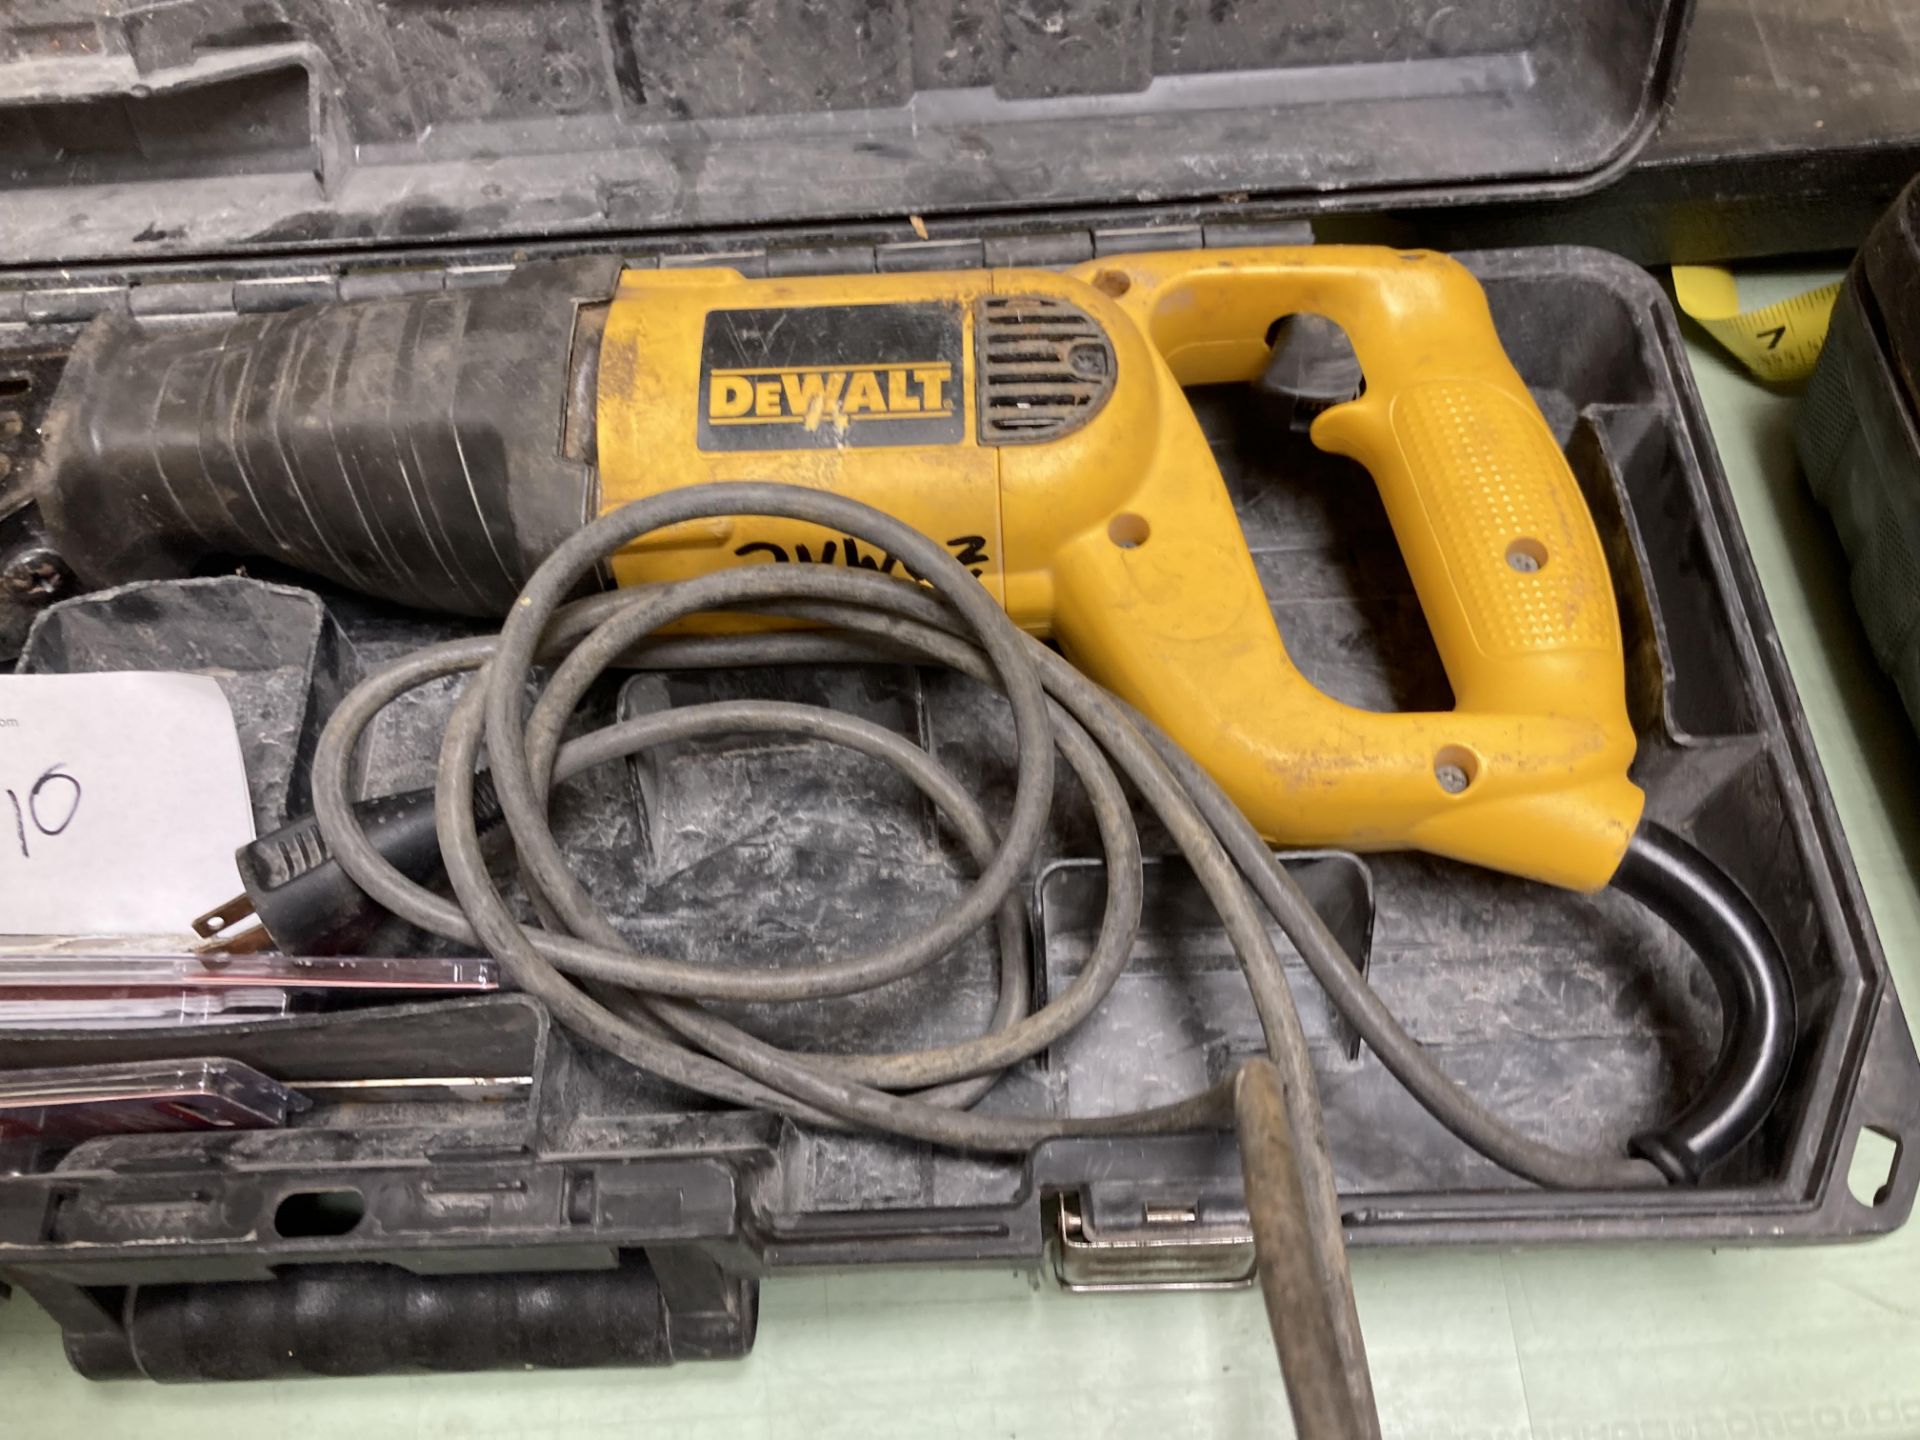 DeWalt reciprocal saw, Model DW303M, with multiple blades and case